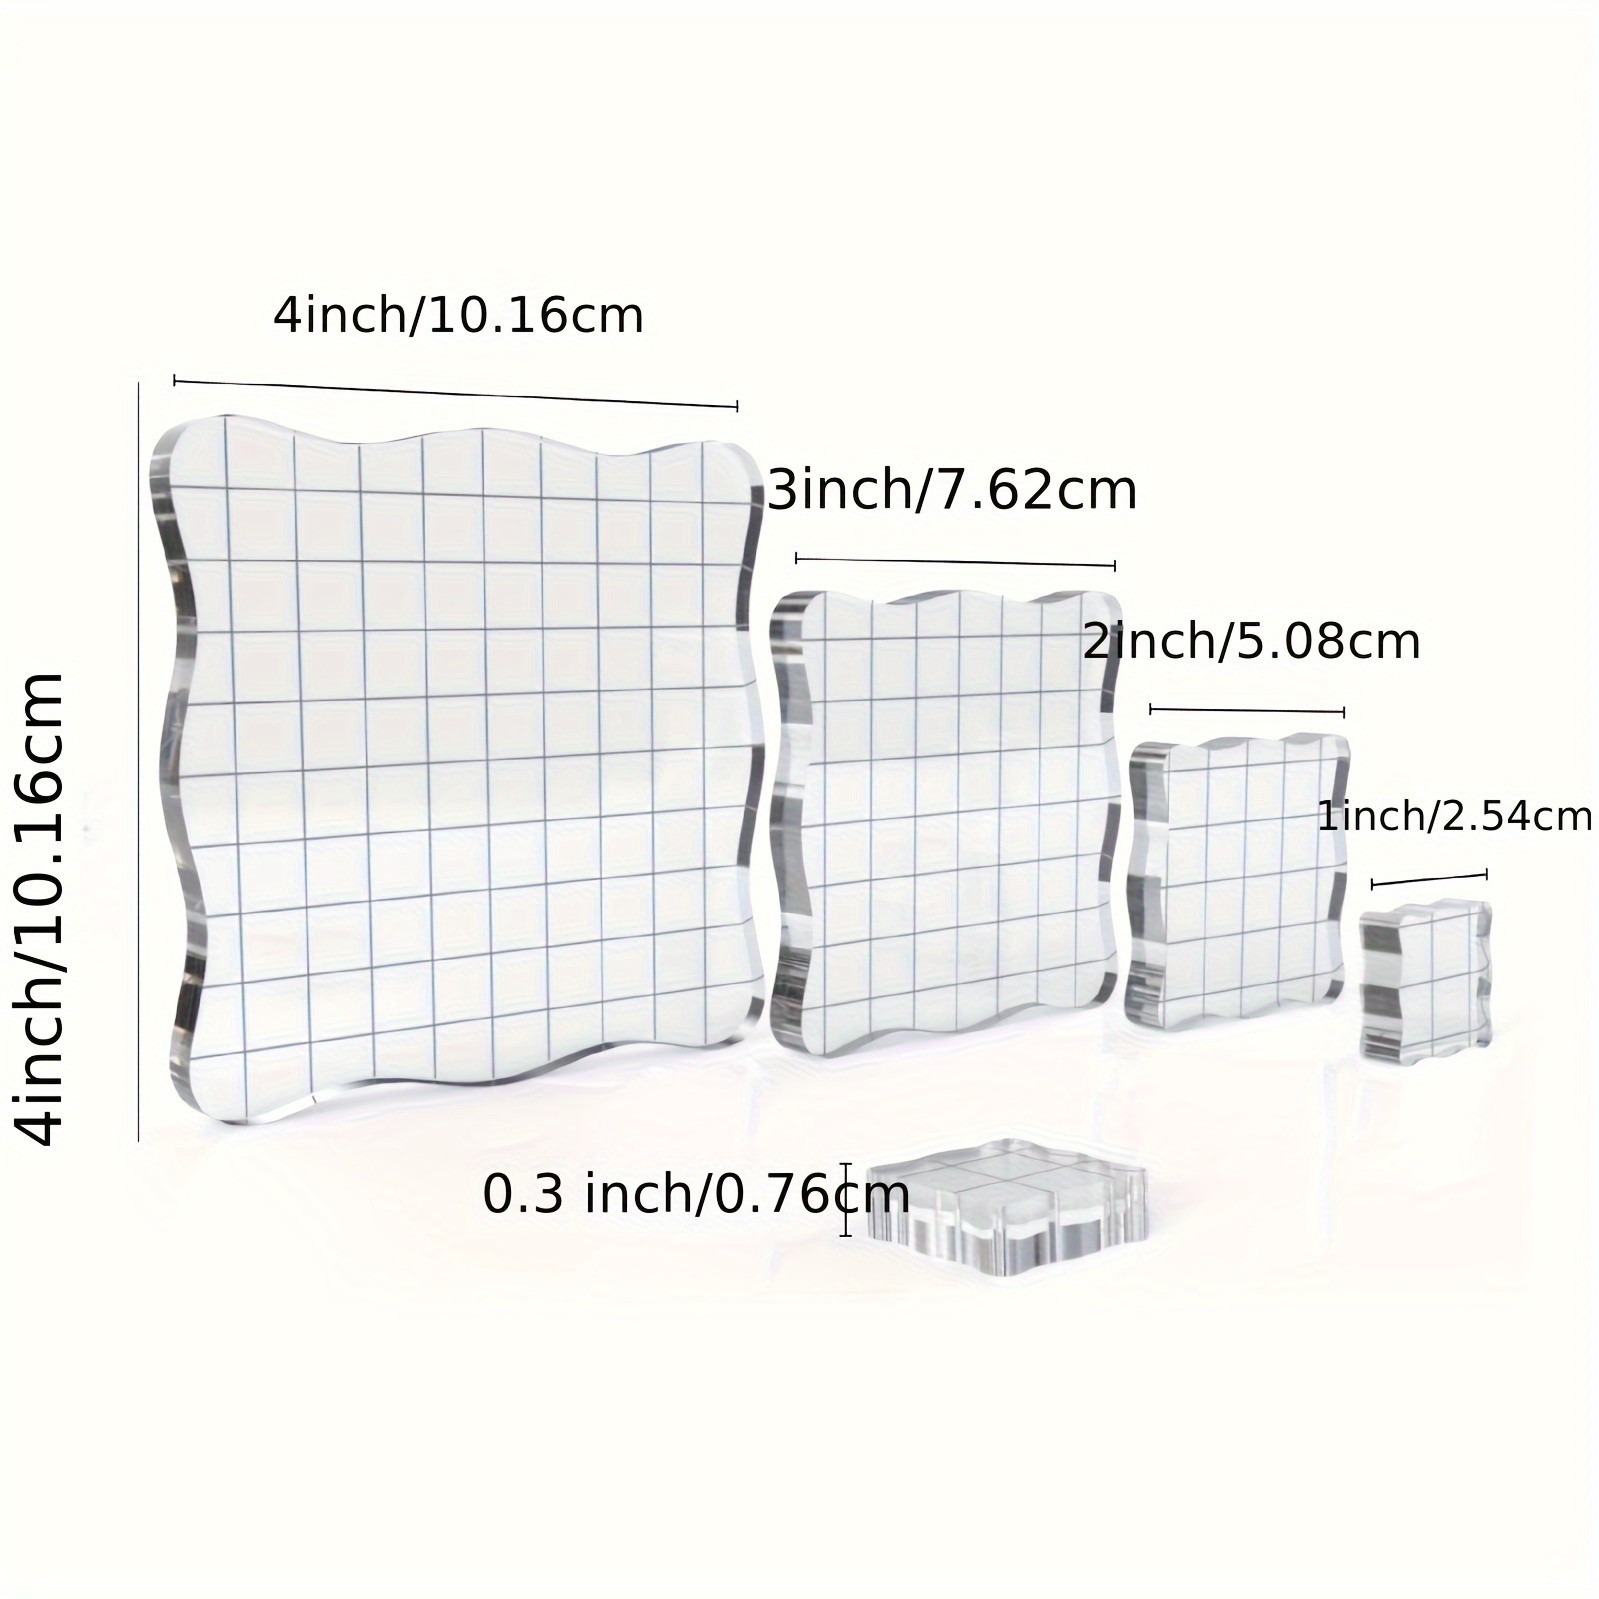 3 Pieces Grid Blocks Tools Stamp Blocks Acrylic Clear Stamping Blocks Tools with Grid and Grip, Decorative Stamp Blocks for DIY Crafts Ornaments